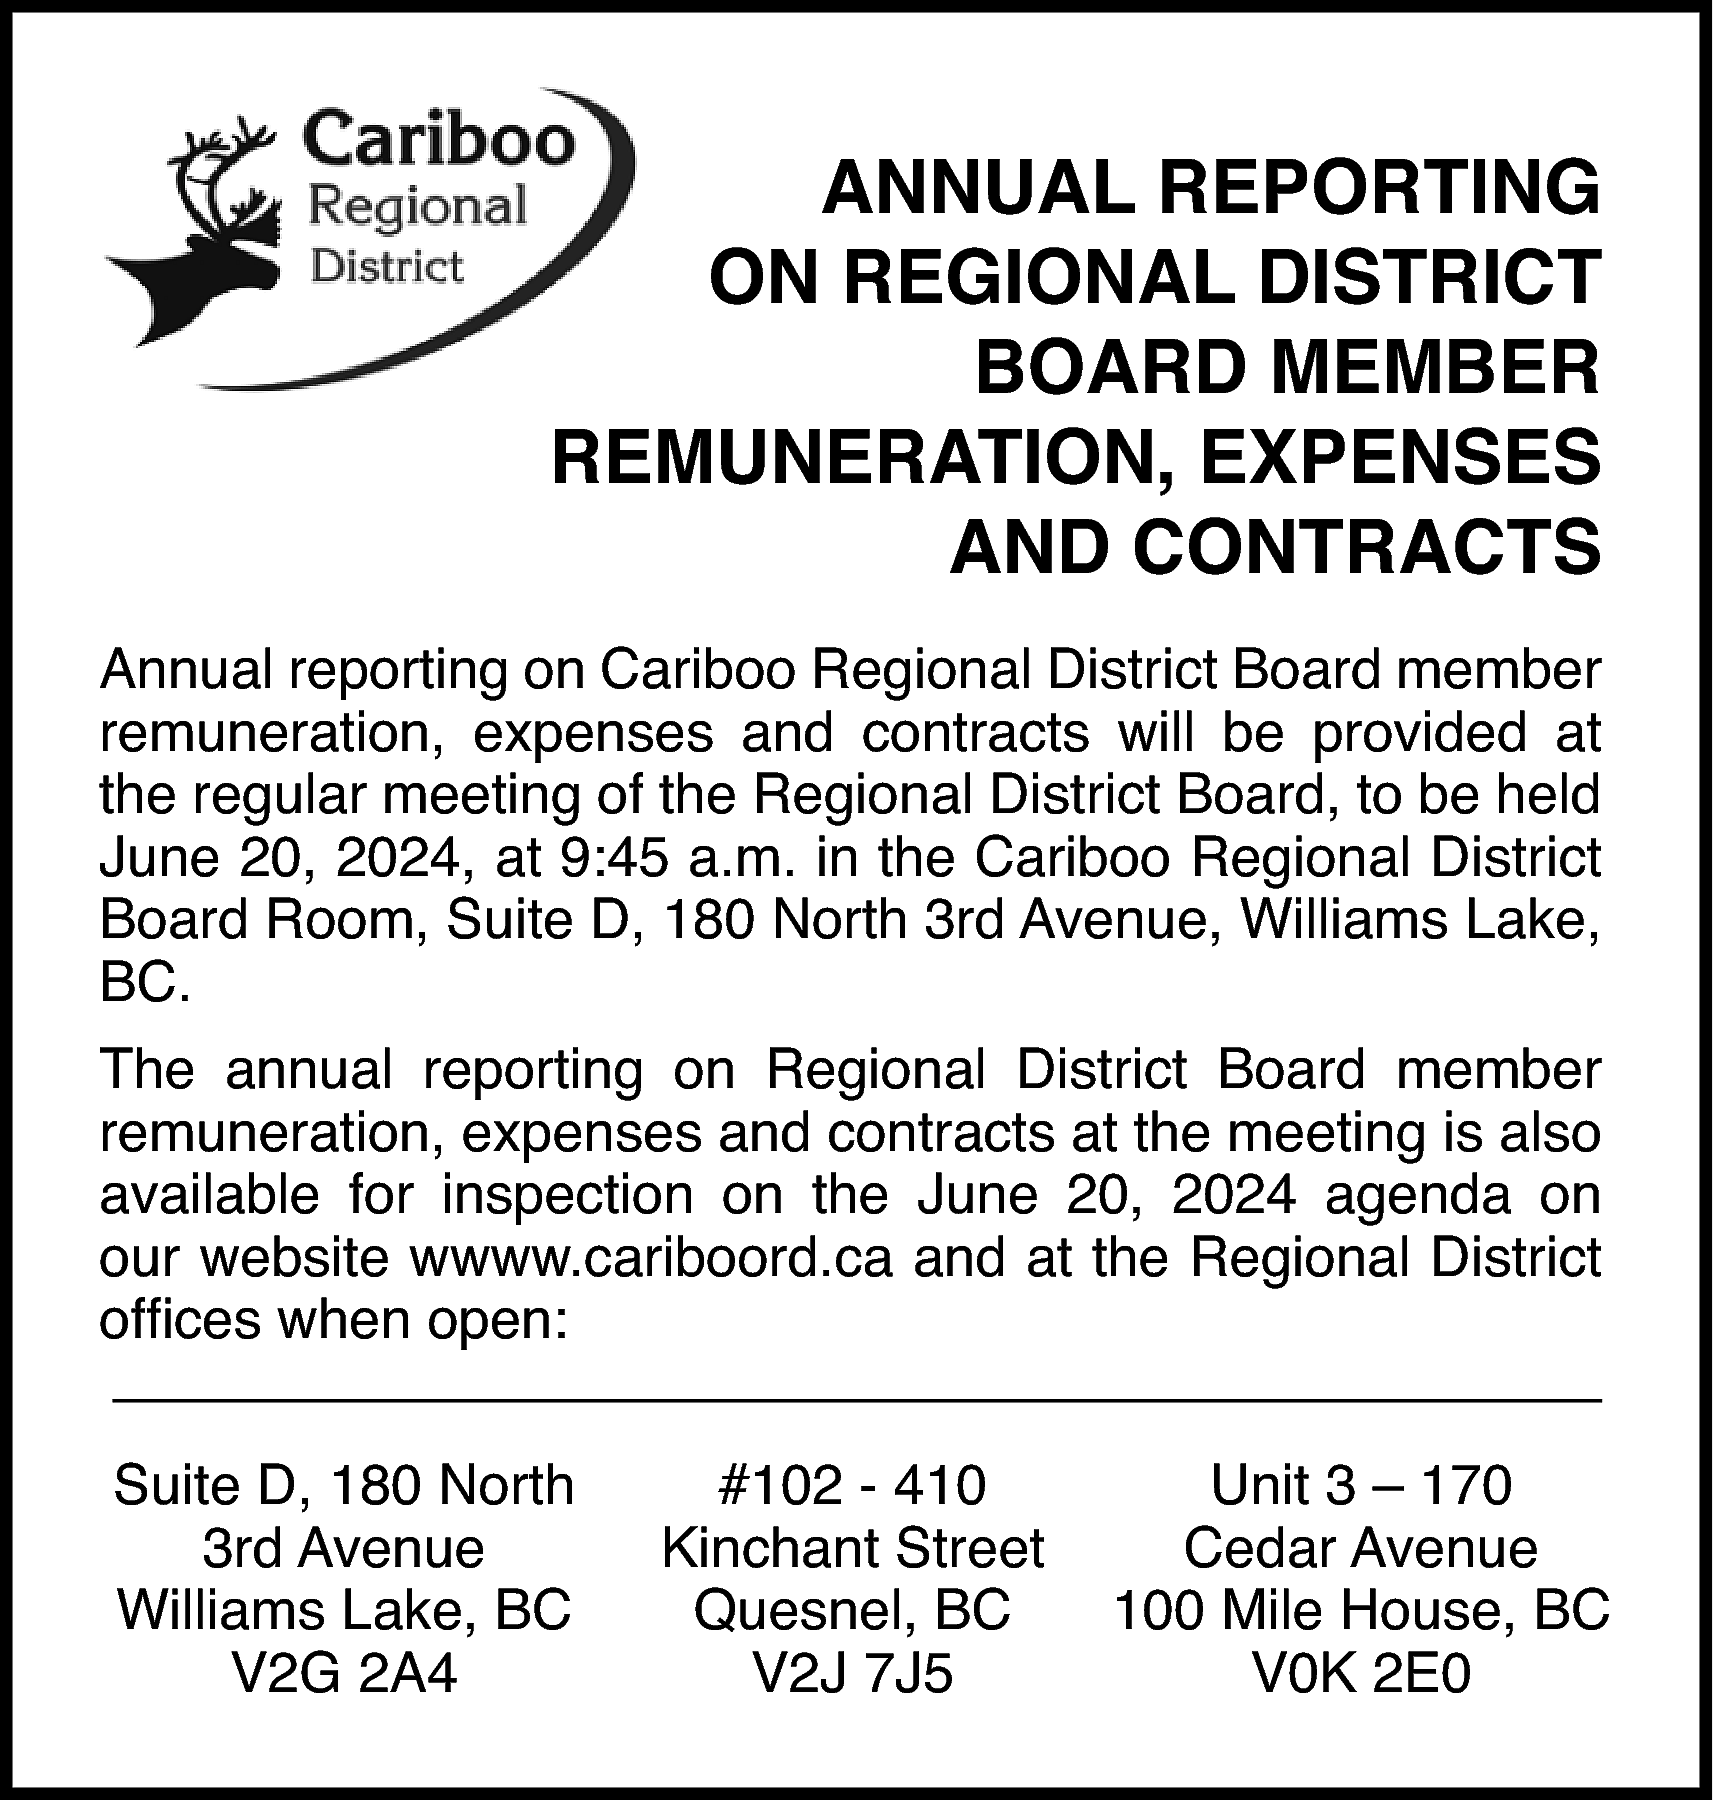 ANNUAL REPORTING <br>ON REGIONAL DISTRICT  ANNUAL REPORTING  ON REGIONAL DISTRICT  BOARD MEMBER  REMUNERATION, EXPENSES  AND CONTRACTS  Annual reporting on Cariboo Regional District Board member  remuneration, expenses and contracts will be provided at  the regular meeting of the Regional District Board, to be held  June 20, 2024, at 9:45 a.m. in the Cariboo Regional District  Board Room, Suite D, 180 North 3rd Avenue, Williams Lake,  BC.  The annual reporting on Regional District Board member  remuneration, expenses and contracts at the meeting is also  available for inspection on the June 20, 2024 agenda on  our website wwww.cariboord.ca and at the Regional District  offices when open:  Suite D, 180 North  3rd Avenue  Williams Lake, BC  V2G 2A4    #102 - 410  Kinchant Street  Quesnel, BC  V2J 7J5    Unit 3 – 170  Cedar Avenue  100 Mile House, BC  V0K 2E0    